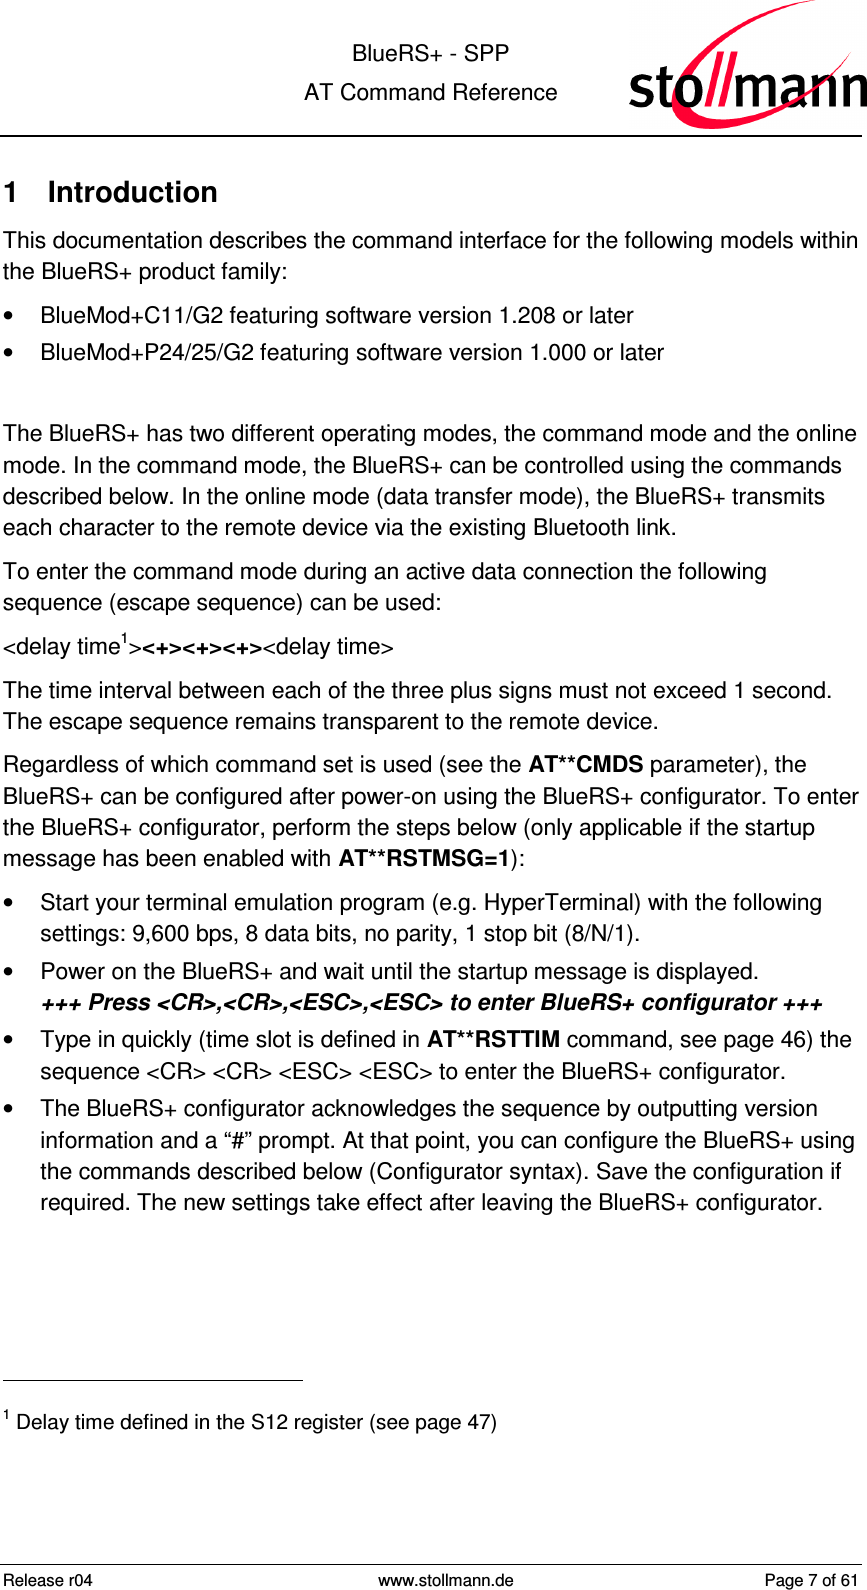  BlueRS+ - SPP AT Command Reference Release r04  www.stollmann.de  Page 7 of 61  1  Introduction This documentation describes the command interface for the following models within the BlueRS+ product family:  •  BlueMod+C11/G2 featuring software version 1.208 or later •  BlueMod+P24/25/G2 featuring software version 1.000 or later  The BlueRS+ has two different operating modes, the command mode and the online mode. In the command mode, the BlueRS+ can be controlled using the commands described below. In the online mode (data transfer mode), the BlueRS+ transmits each character to the remote device via the existing Bluetooth link. To enter the command mode during an active data connection the following sequence (escape sequence) can be used: &lt;delay time1&gt;&lt;+&gt;&lt;+&gt;&lt;+&gt;&lt;delay time&gt; The time interval between each of the three plus signs must not exceed 1 second. The escape sequence remains transparent to the remote device. Regardless of which command set is used (see the AT**CMDS parameter), the BlueRS+ can be configured after power-on using the BlueRS+ configurator. To enter the BlueRS+ configurator, perform the steps below (only applicable if the startup message has been enabled with AT**RSTMSG=1): •  Start your terminal emulation program (e.g. HyperTerminal) with the following settings: 9,600 bps, 8 data bits, no parity, 1 stop bit (8/N/1). •  Power on the BlueRS+ and wait until the startup message is displayed.  +++ Press &lt;CR&gt;,&lt;CR&gt;,&lt;ESC&gt;,&lt;ESC&gt; to enter BlueRS+ configurator +++ •  Type in quickly (time slot is defined in AT**RSTTIM command, see page 46) the sequence &lt;CR&gt; &lt;CR&gt; &lt;ESC&gt; &lt;ESC&gt; to enter the BlueRS+ configurator. •  The BlueRS+ configurator acknowledges the sequence by outputting version information and a “#” prompt. At that point, you can configure the BlueRS+ using the commands described below (Configurator syntax). Save the configuration if required. The new settings take effect after leaving the BlueRS+ configurator.                                                 1 Delay time defined in the S12 register (see page 47) 